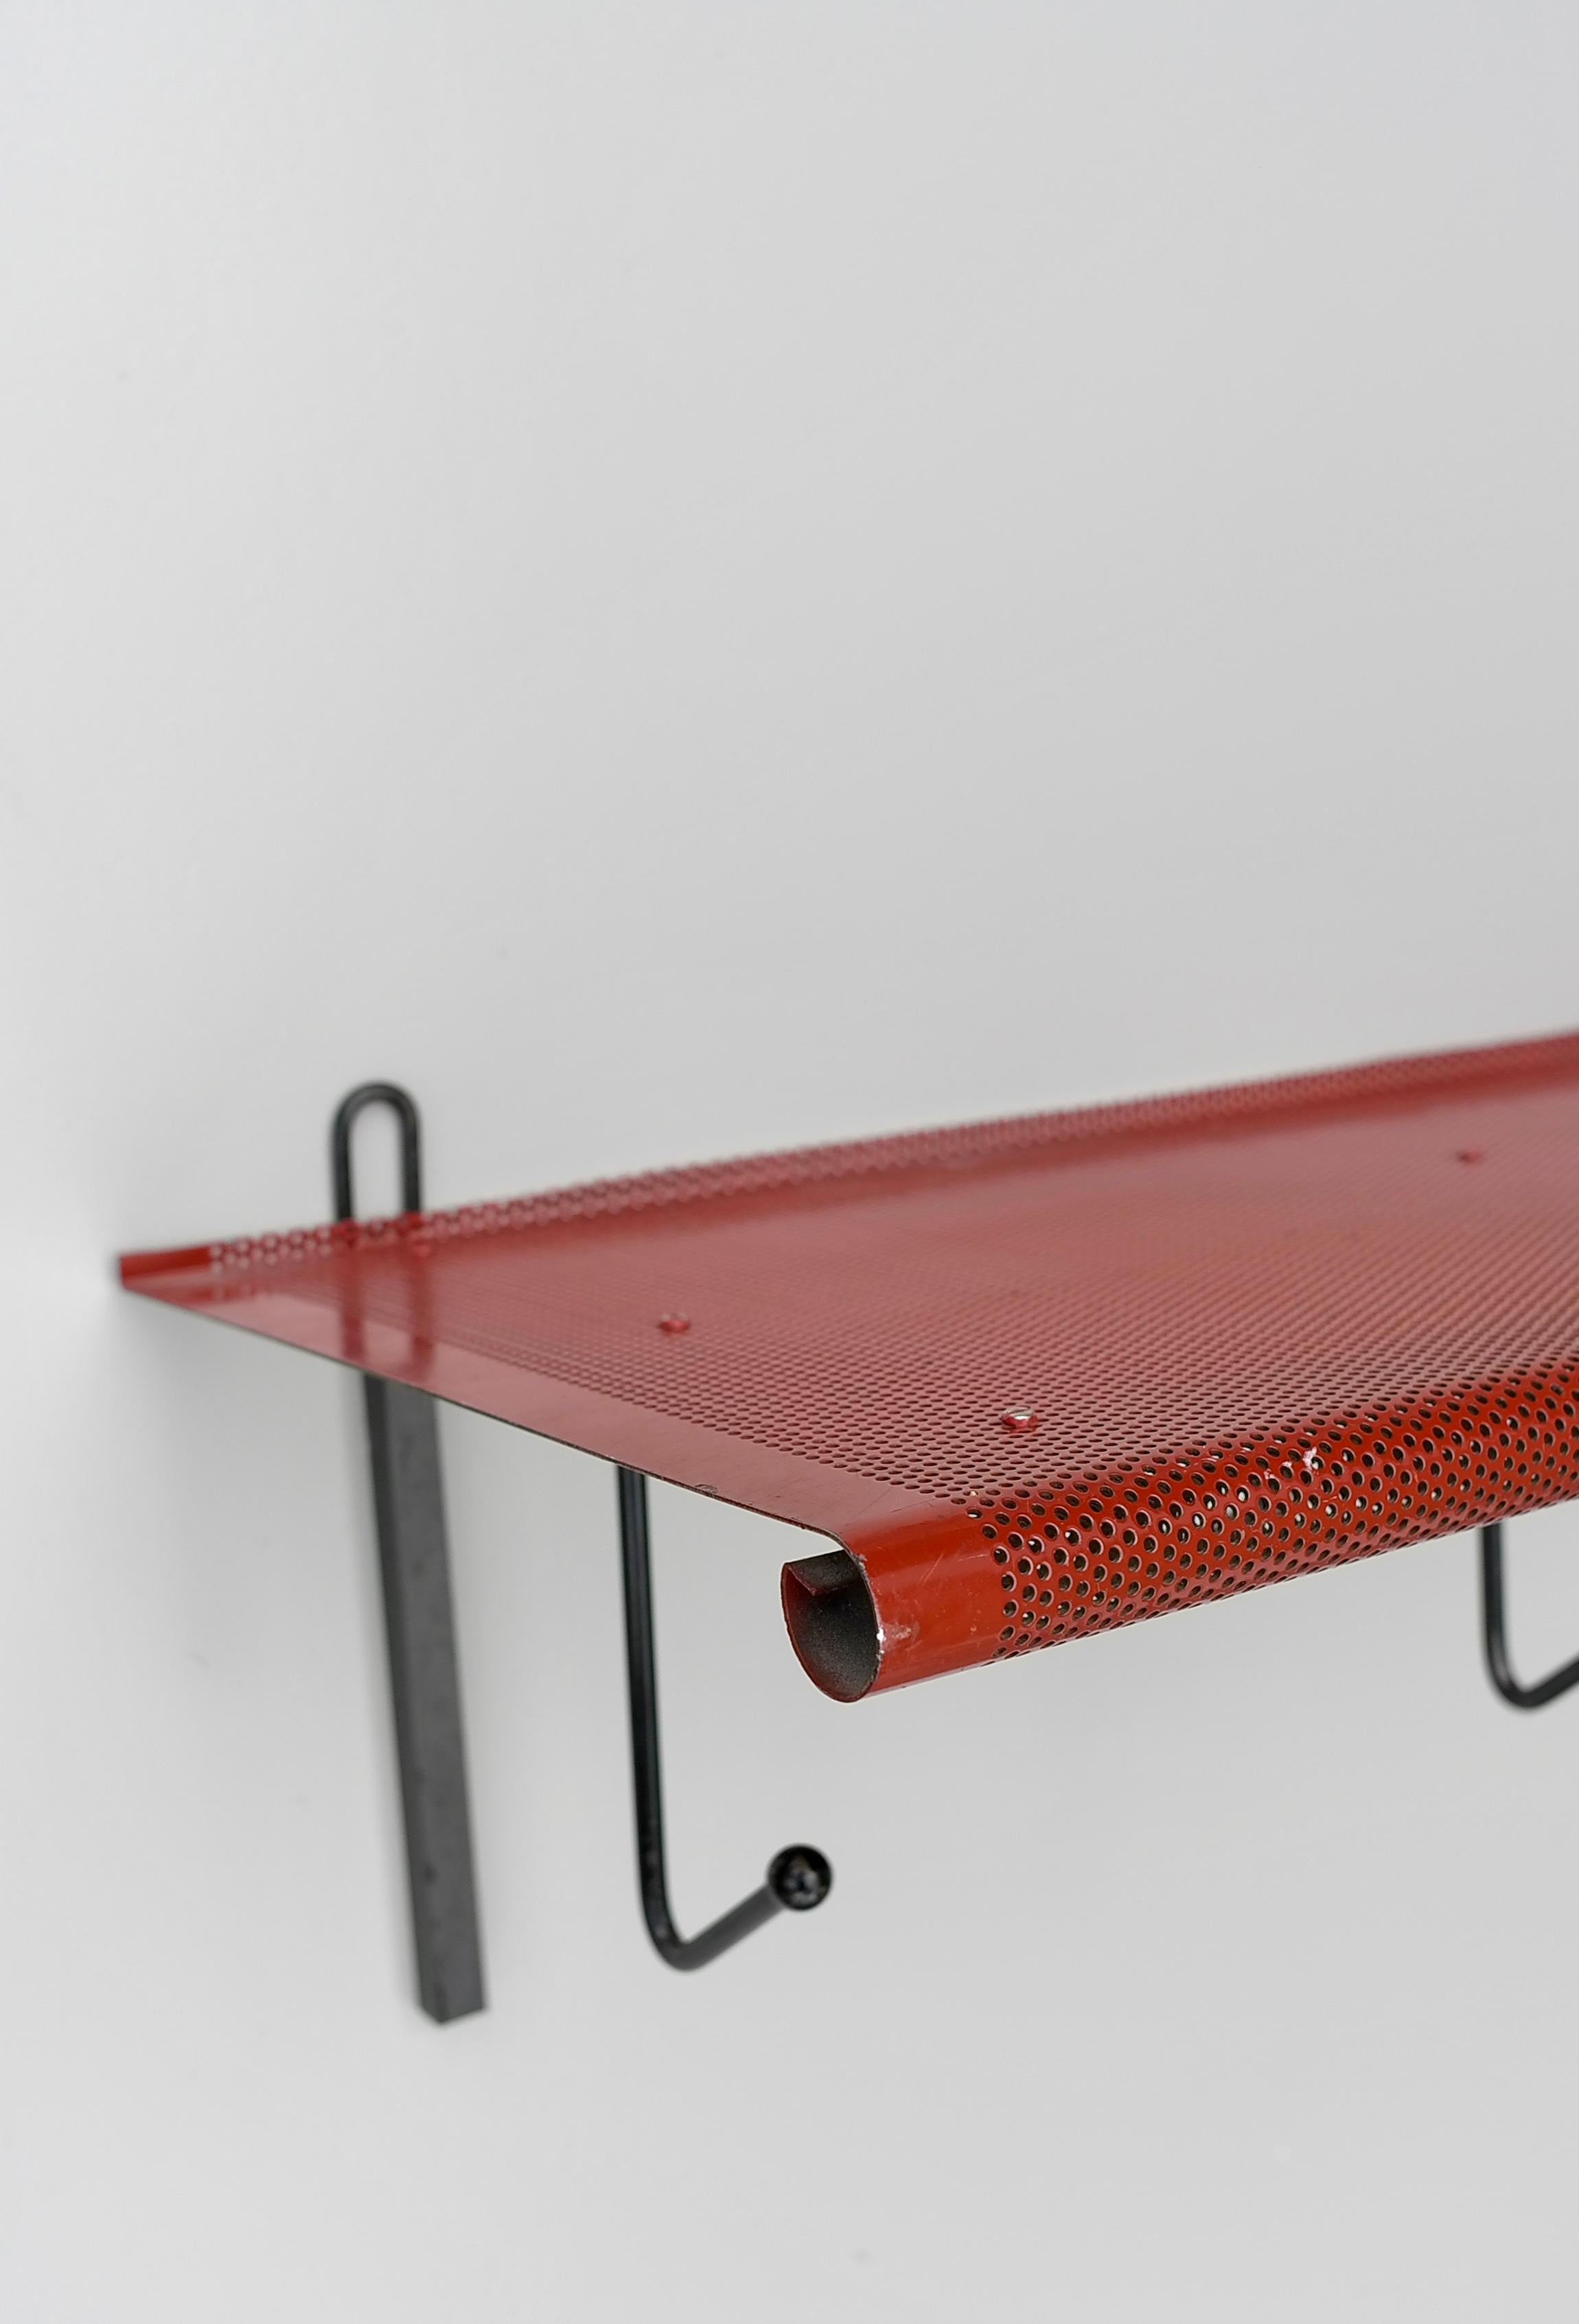 Mid-Century Modern Mathieu Matégot Red and black Wall-Mounted Coat Rack, 1950s For Sale